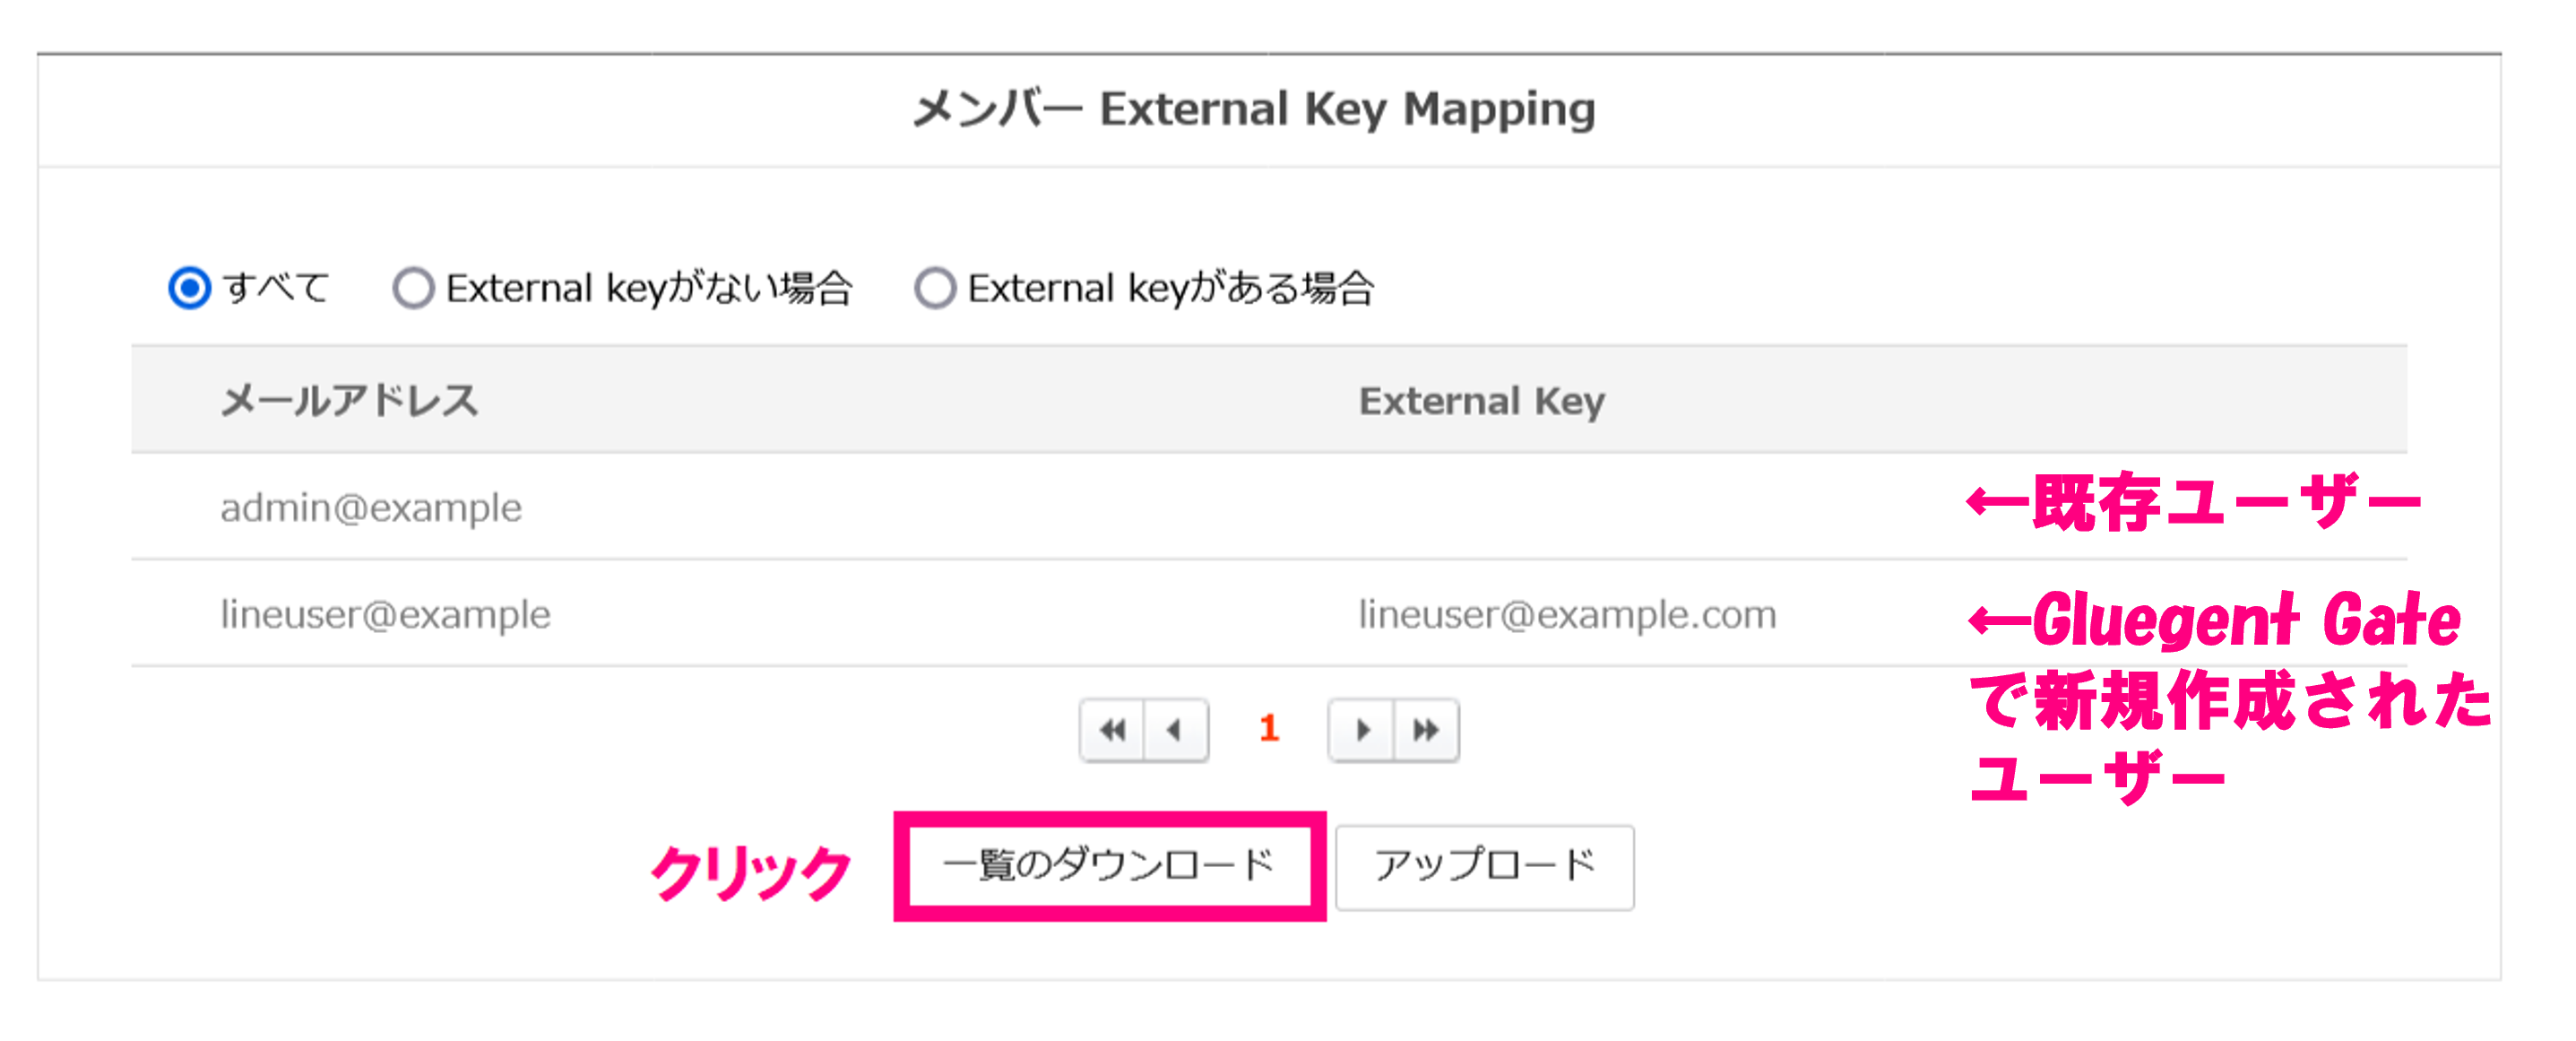 External Key Mapping一覧.png